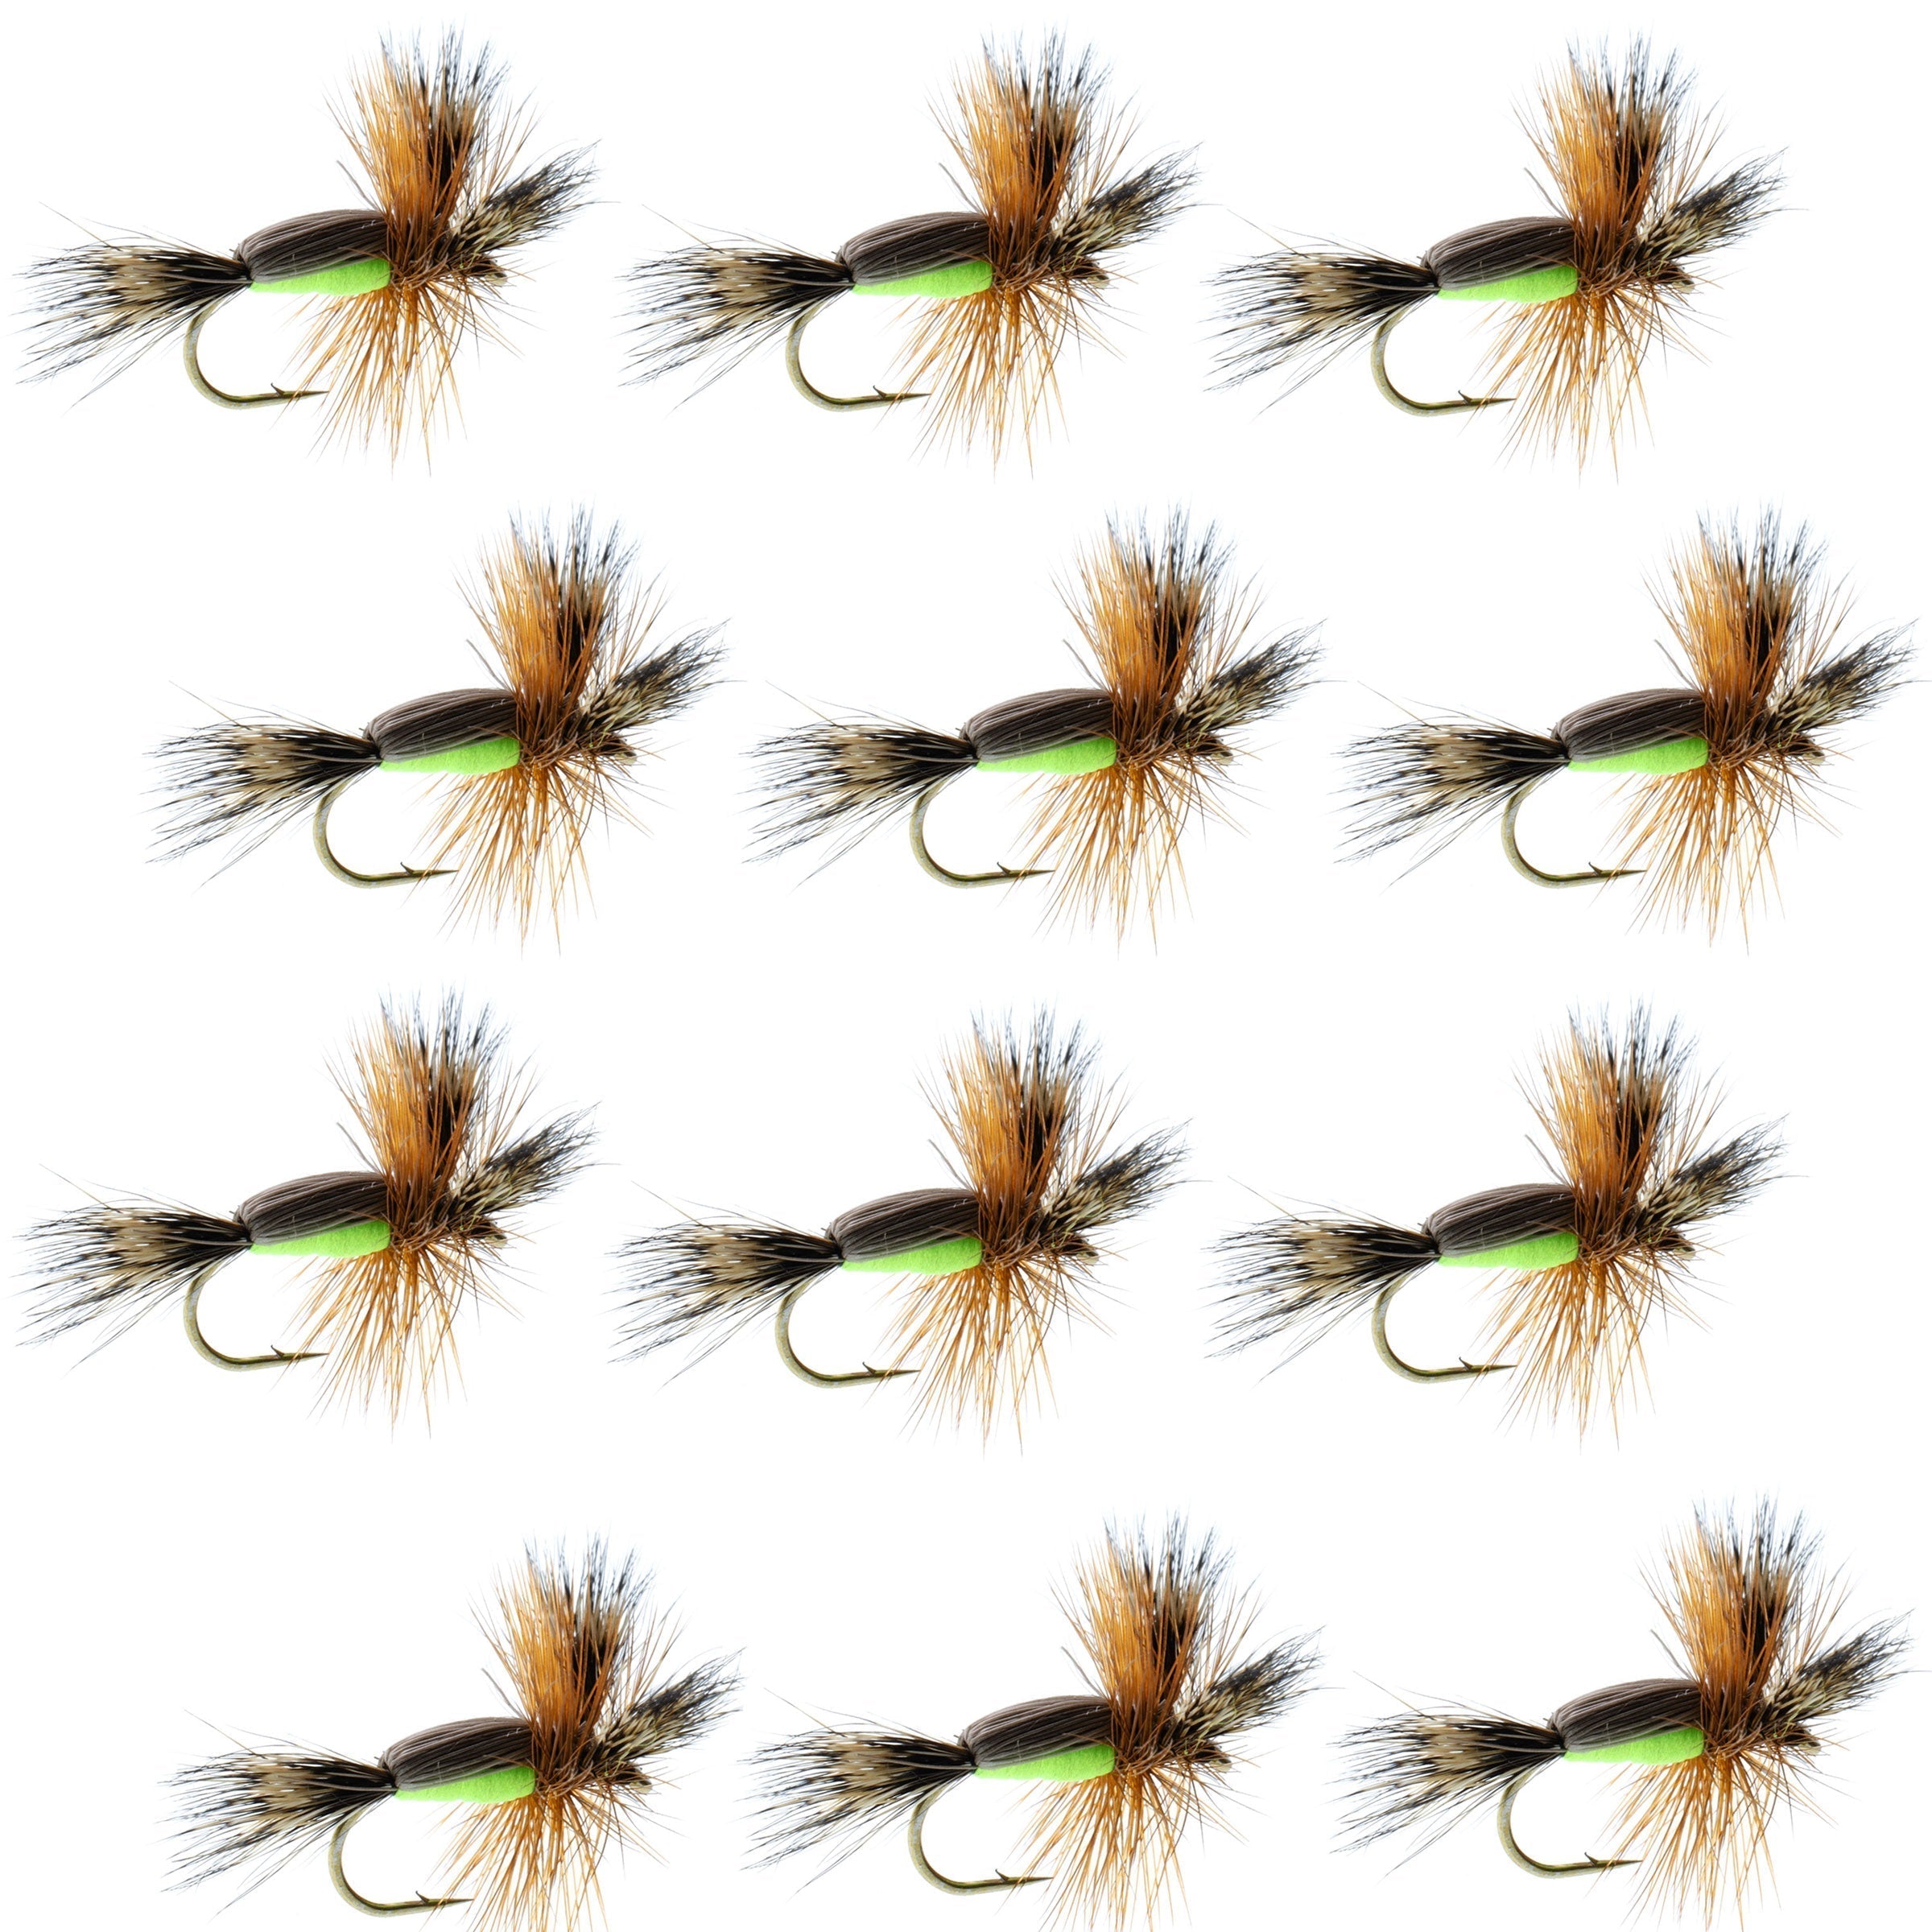 Chartreuse Humpy Classic Hair Wing Dry Fly - 1 docena de anzuelos para moscas, tamaño 16